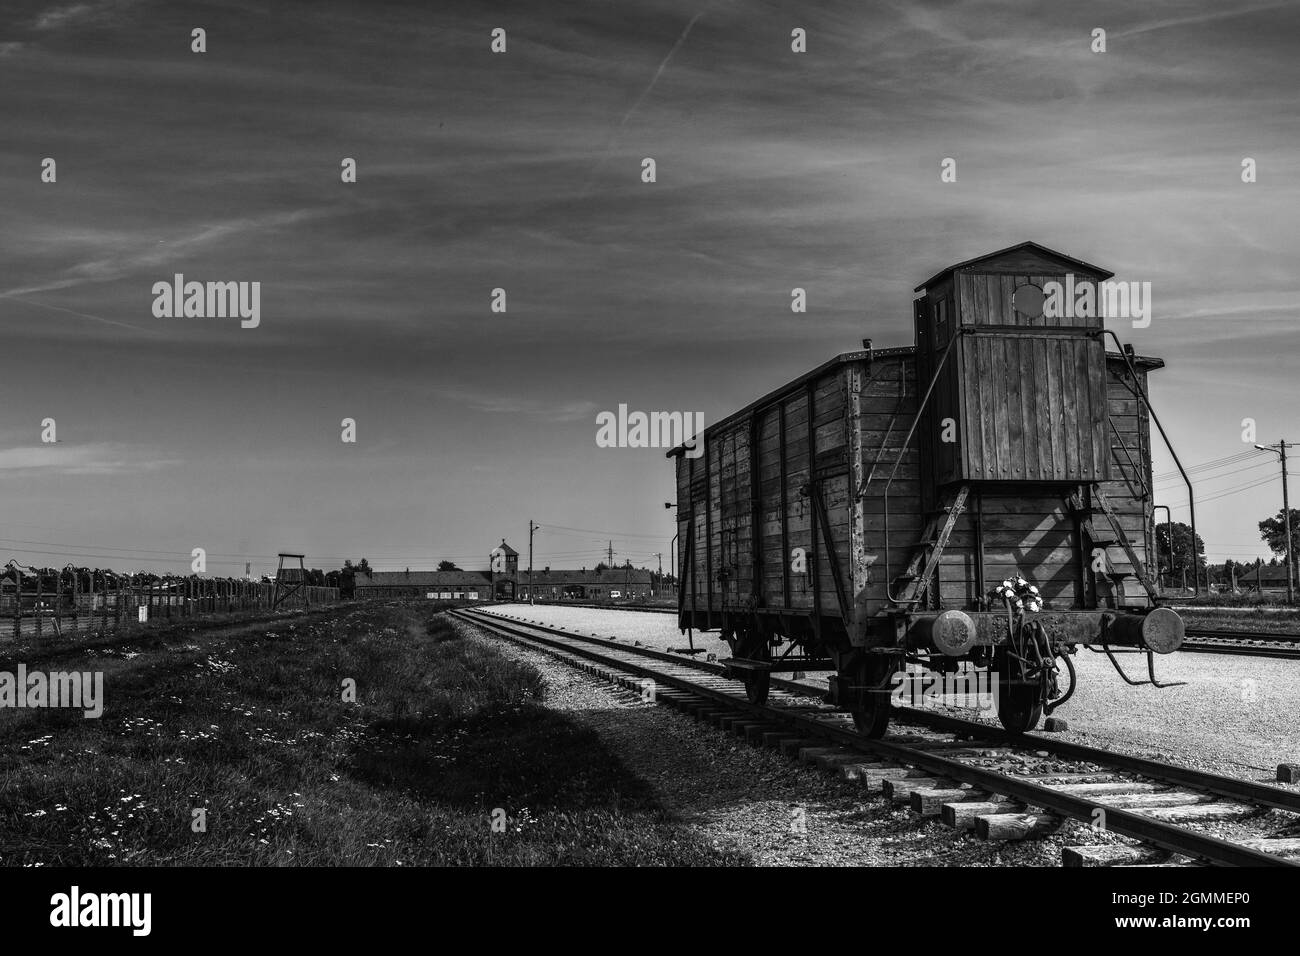 Auschwitz, Poland - 15 September, 2021: black and white view of an old railroad carriage used for transporting prisoners to Auschwitz Stock Photo